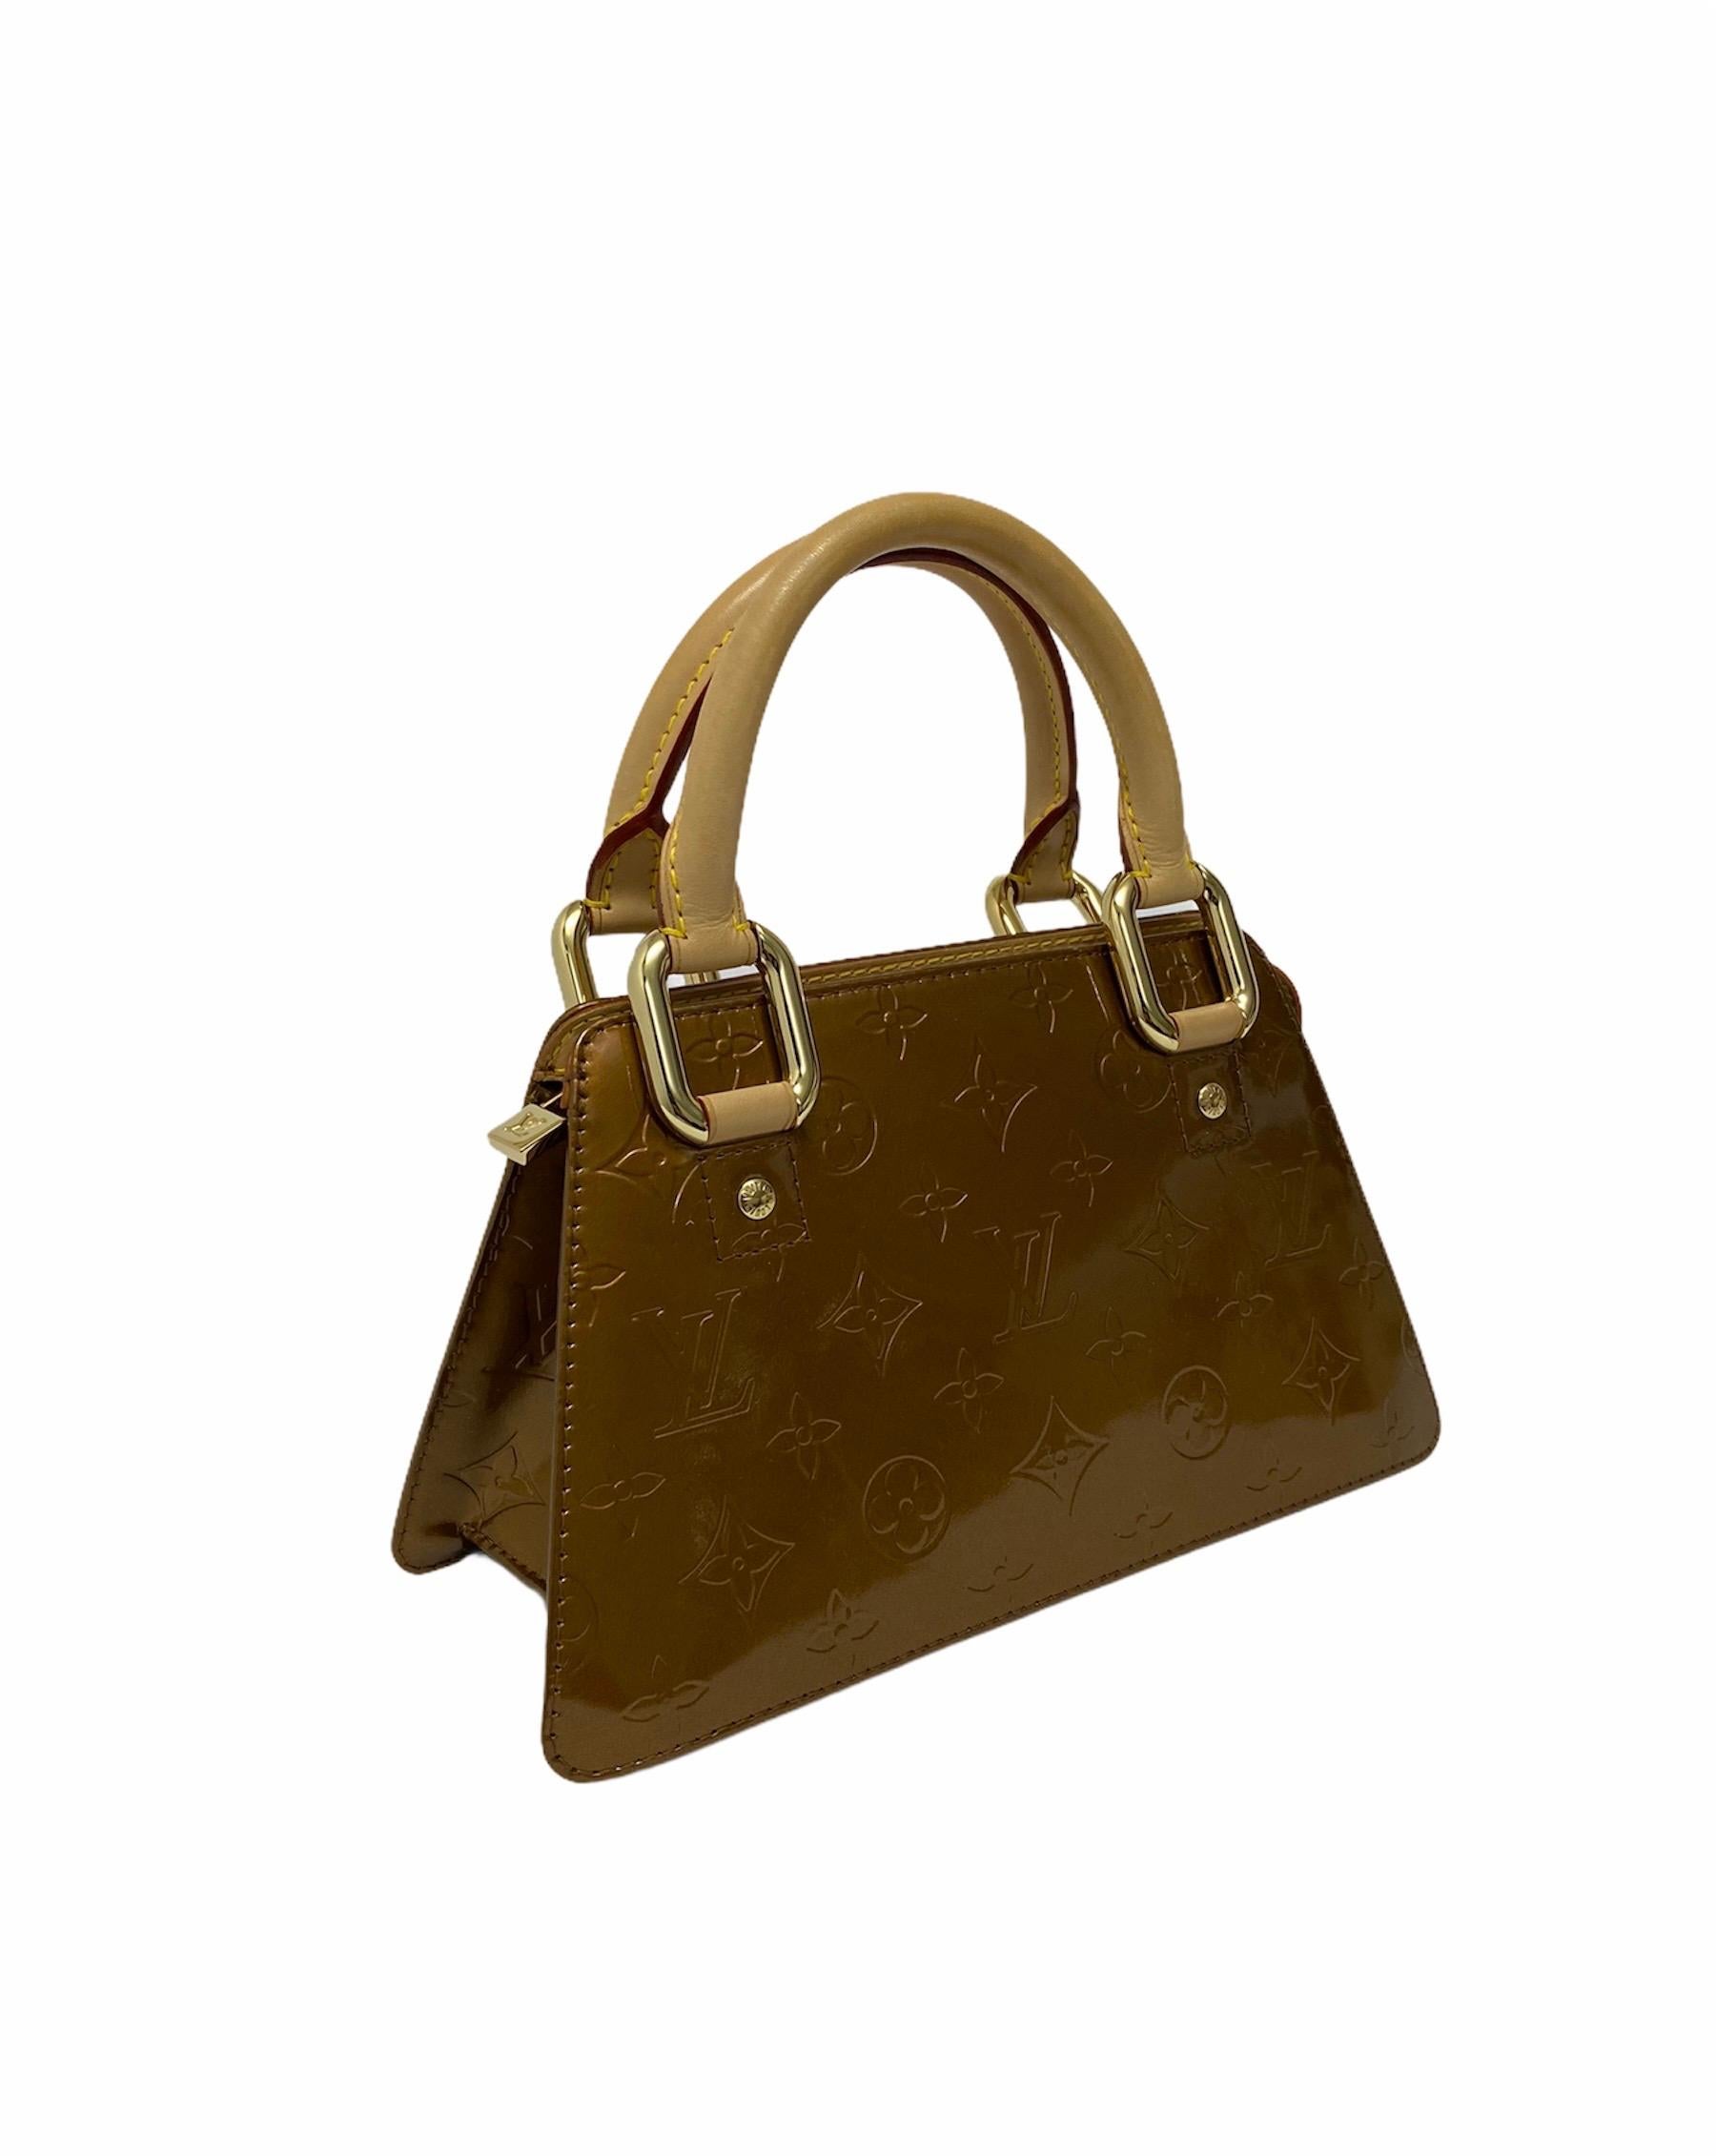 Louis Vuitton bag, Forsyth Mini model, made of bronze patent leather, with cowhide inserts and golden hardware. Equipped with a zip closure, internally lined in brown leather, roomy for the essentials. Equipped with two rigid cowhide handles and an